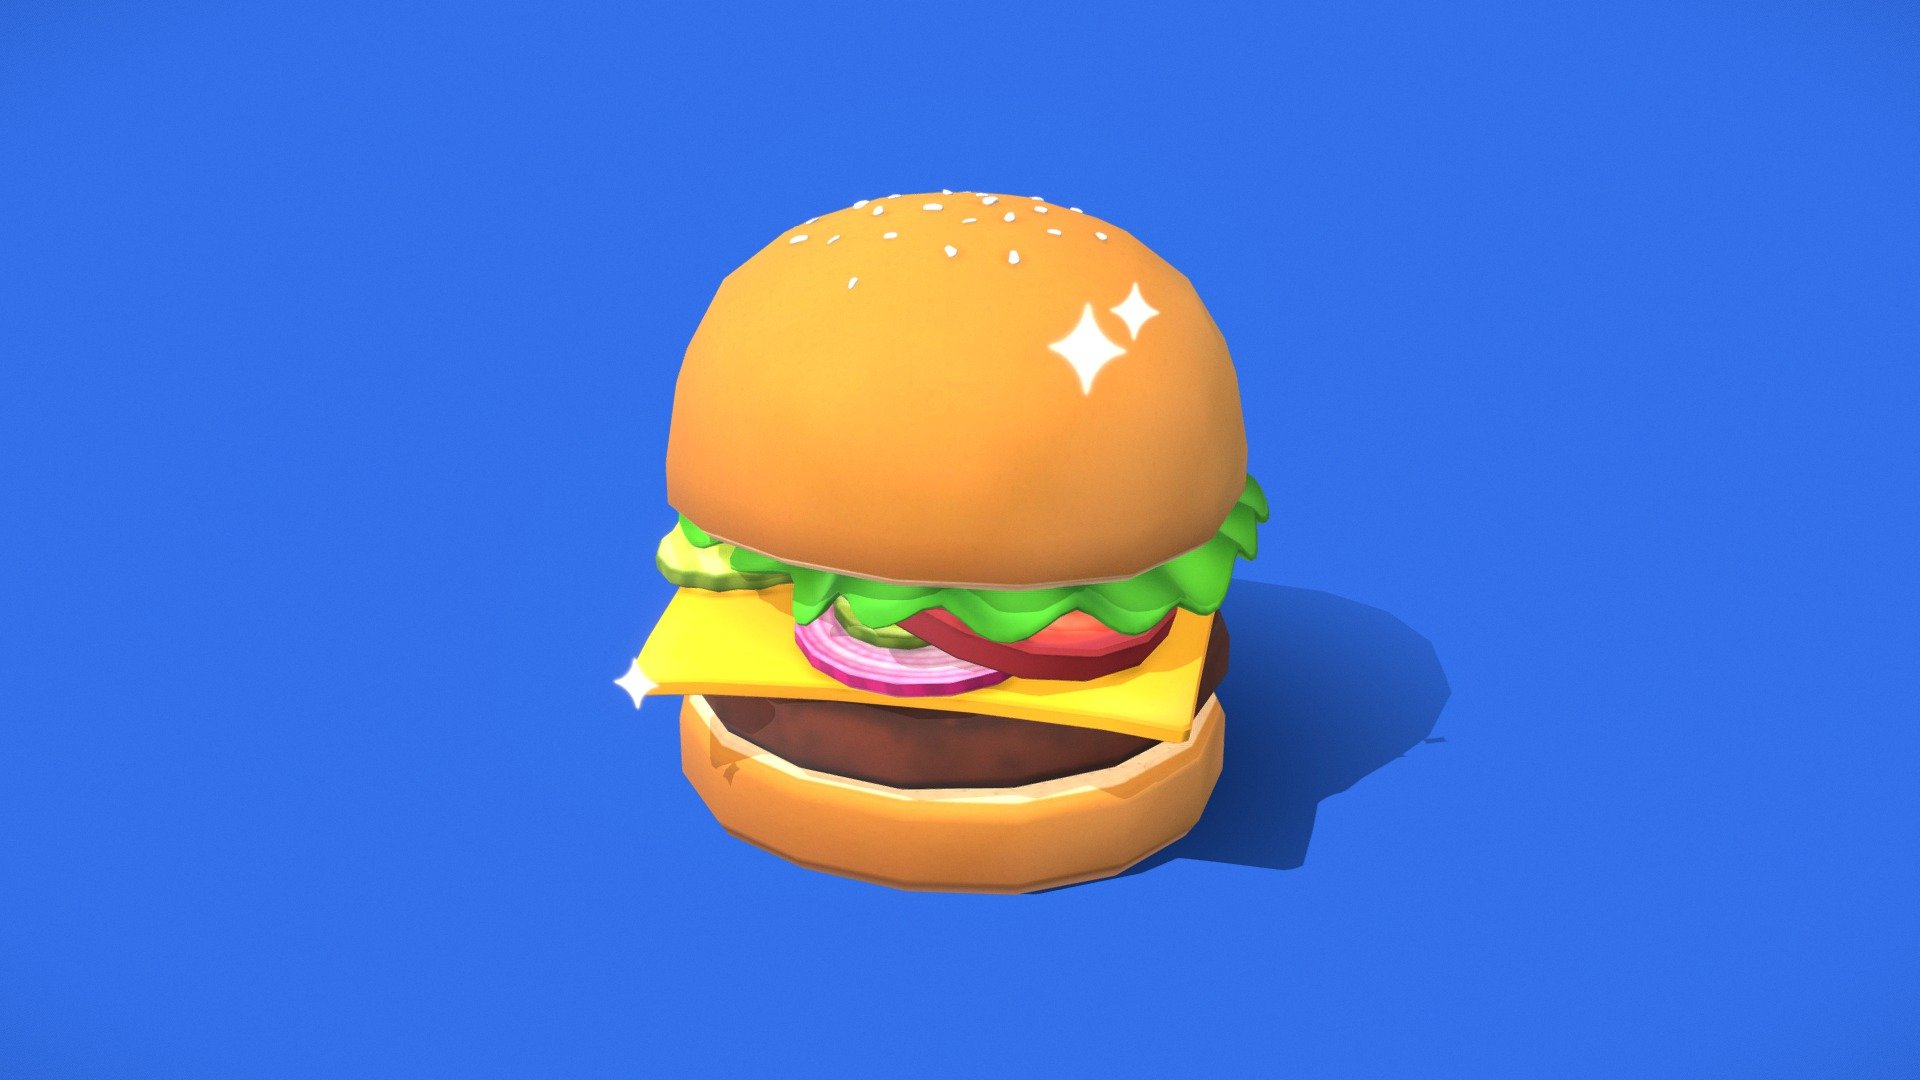 This is the Deluxe Krabby Patty, a classic item on the Krusty Krab's menu not to be confused with the Krabby Double Deluxe!

&ldquo;To prepare a Krabby Patty, the grill must be heated to exactly 298 °F. Then the patty has to be flipped on the grill and not burned. the order of putting the ingredients is: bottom bun, mayo, patty, cheese, onions, tomatoes, ketchup, mustard, pickles, lettuce and top bun.